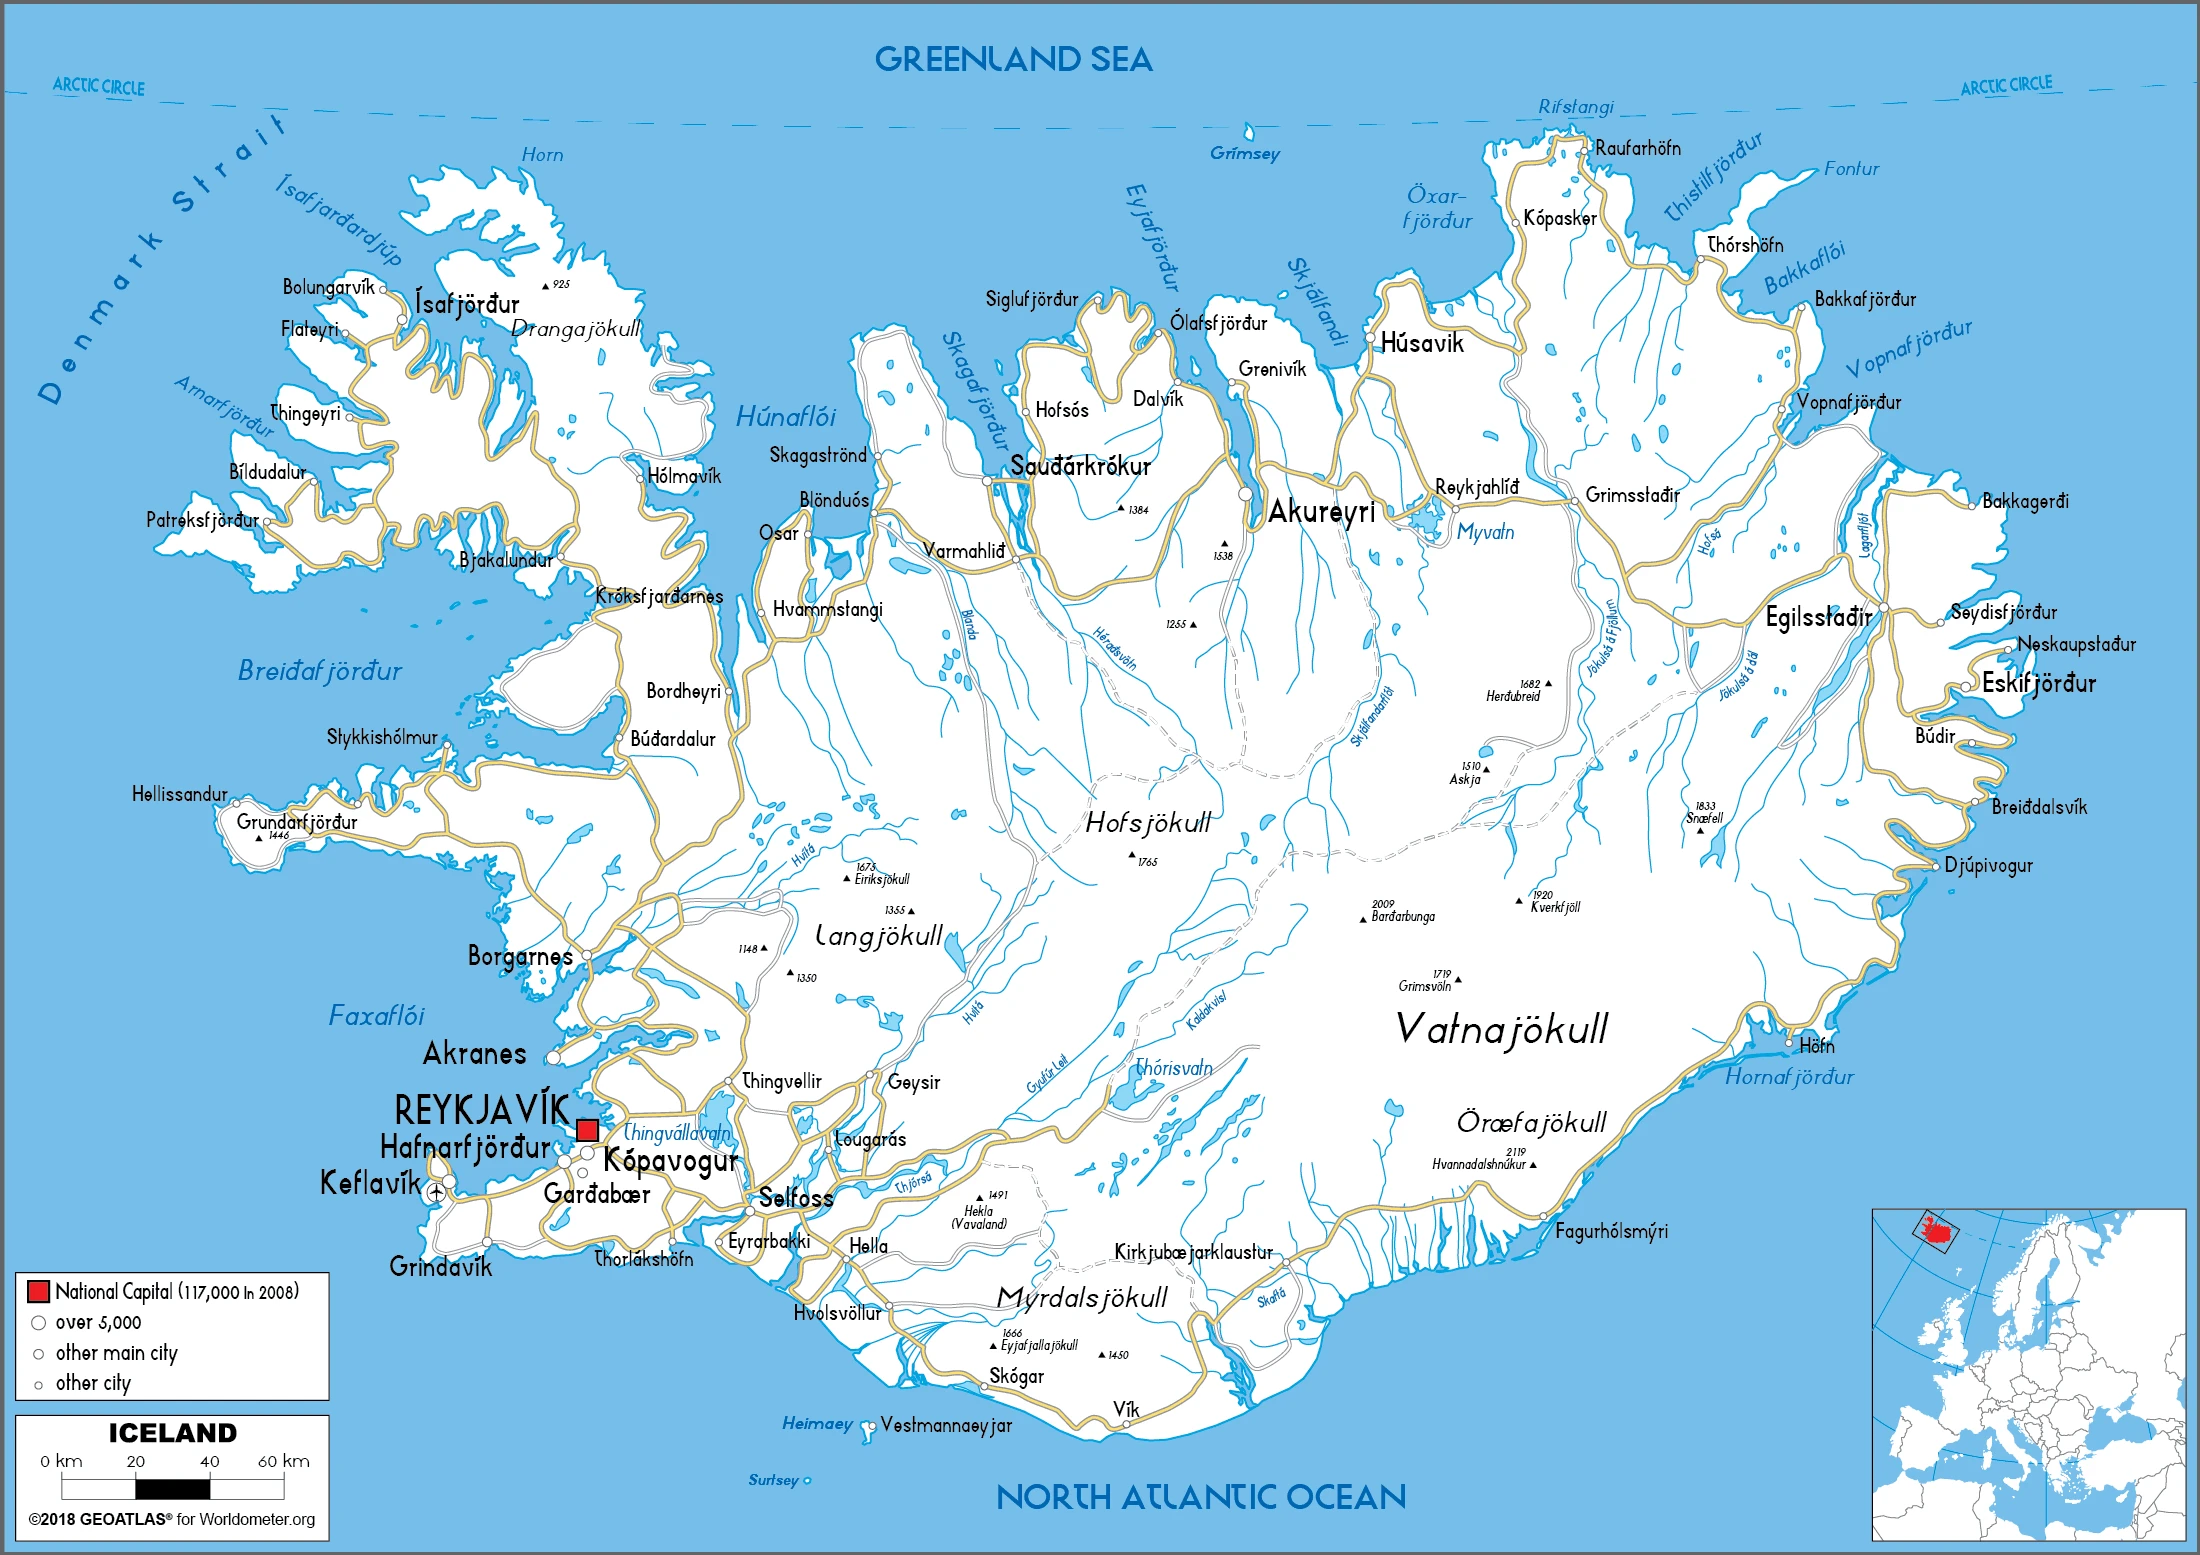 The route plan of the Icelandic roadways.